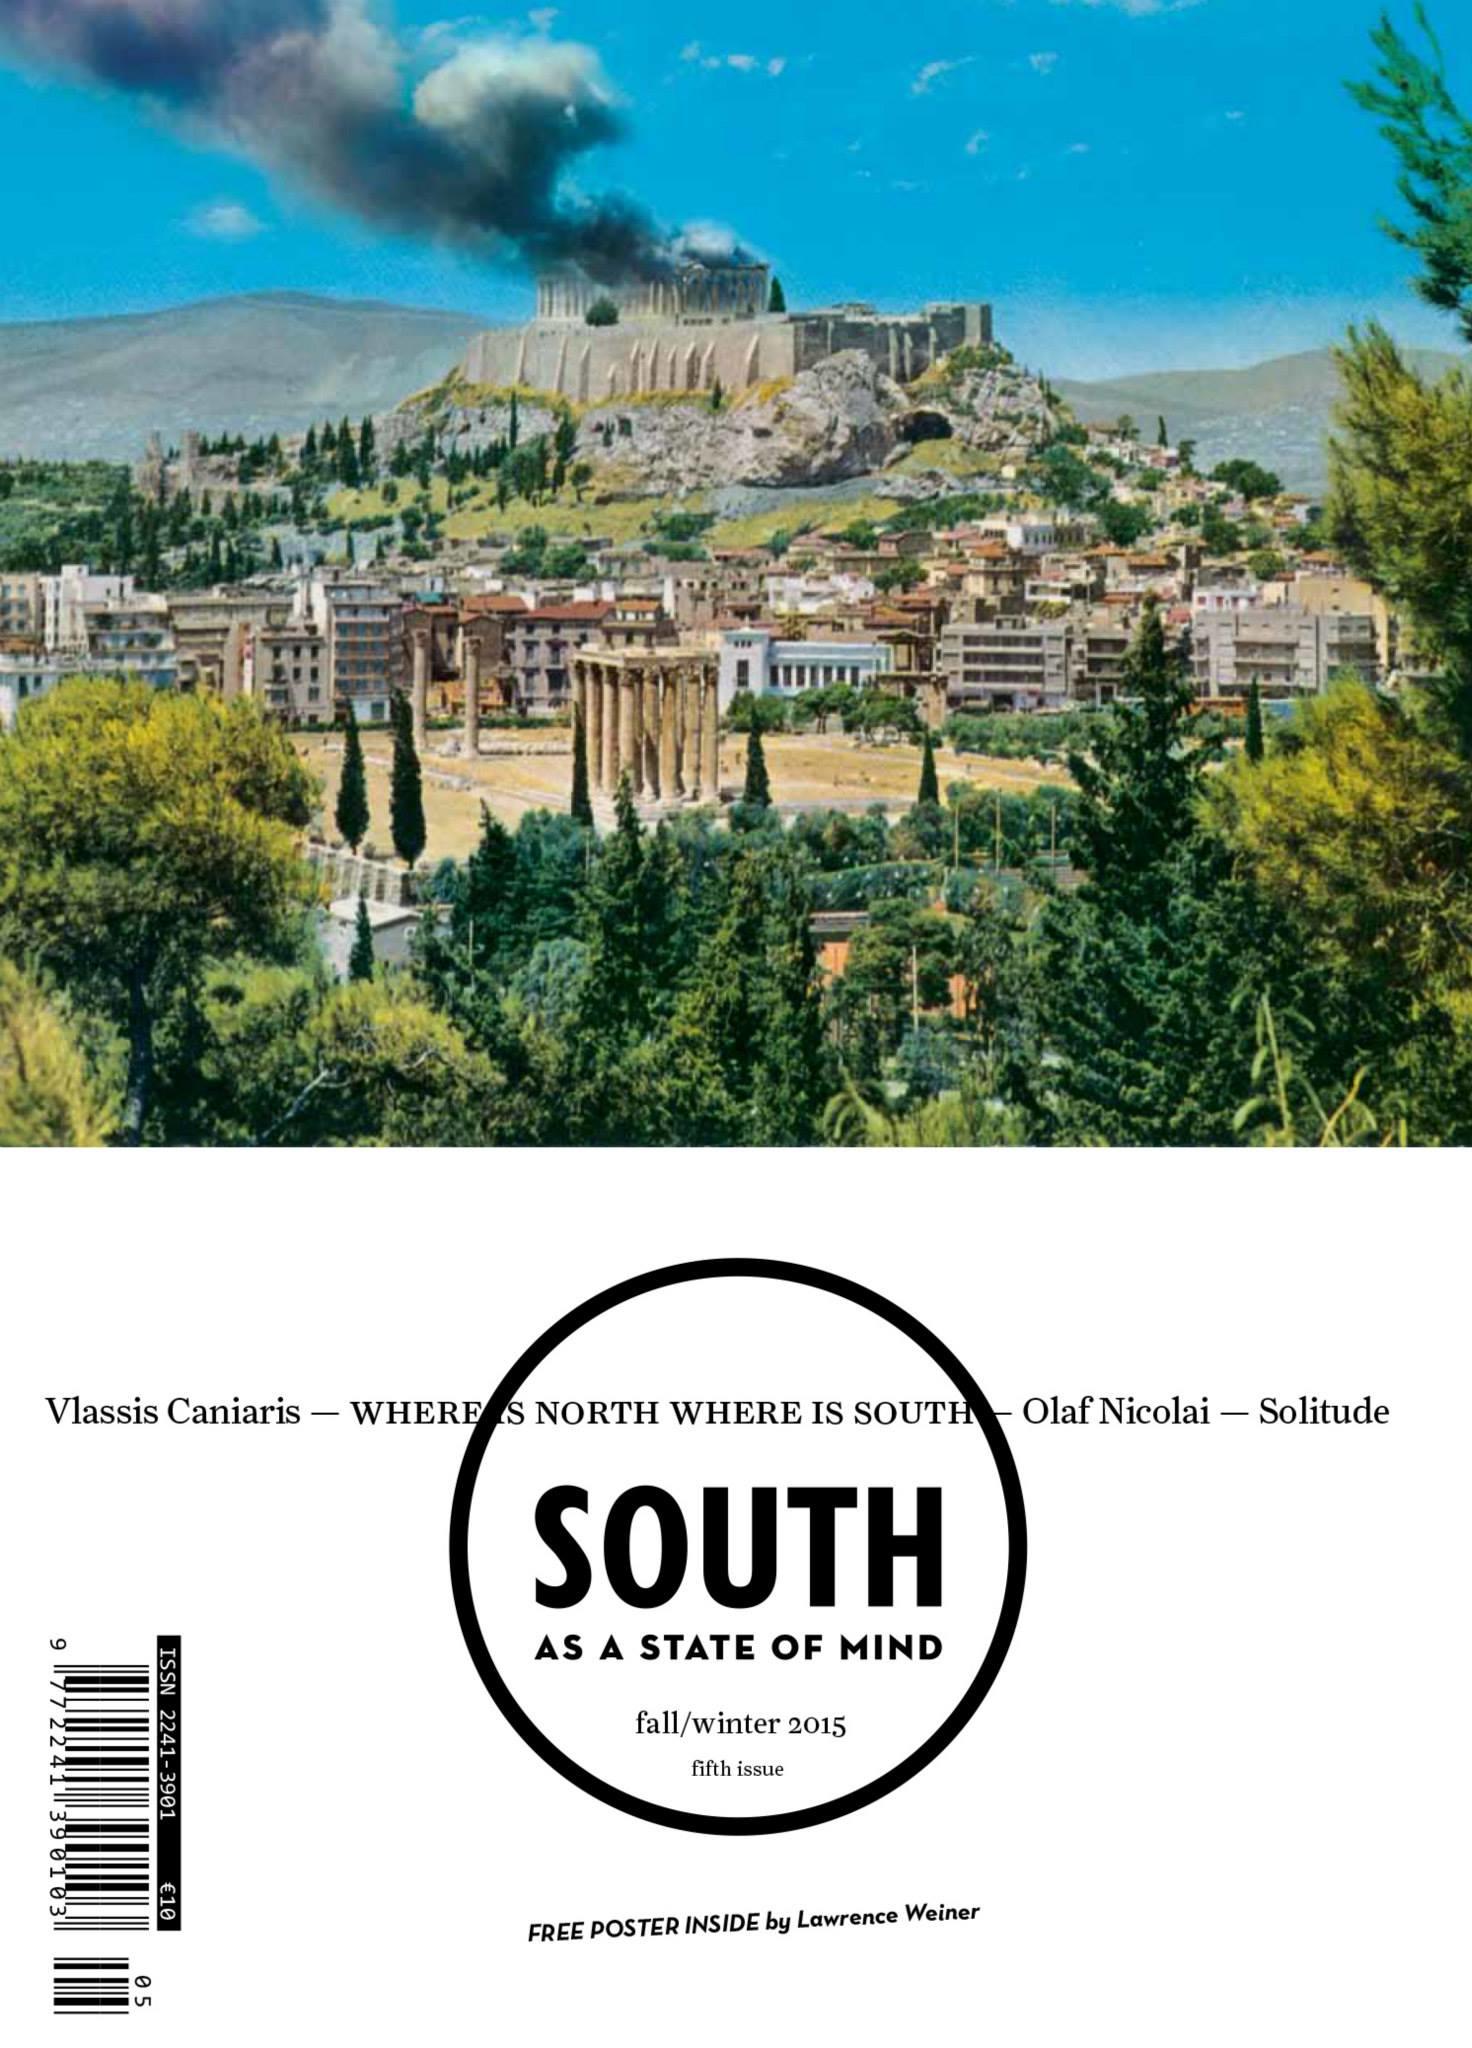 South as a state of mind-issue-5